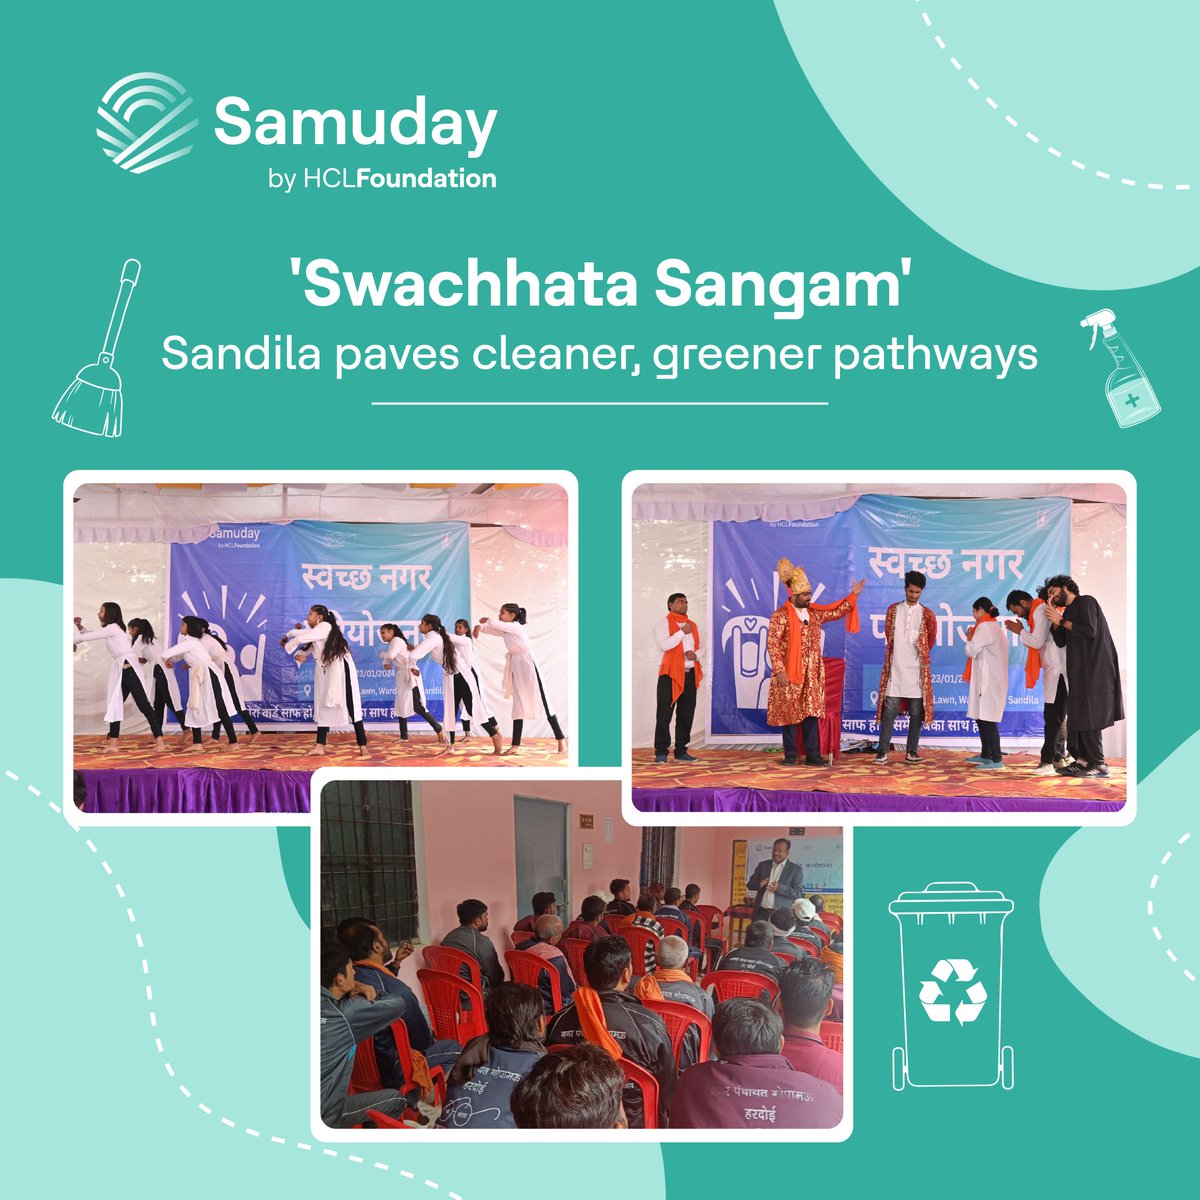 To raise awareness about #solidwastemanagement & best #sanitation practices, Samuday organised 'Swachhata Sangam' at Sandila Nagar Palika Parishad, Hardoi.​ In the event, residents learned about best practices for a #cleanerenvironment through engaging activities.

#HCLFoundation